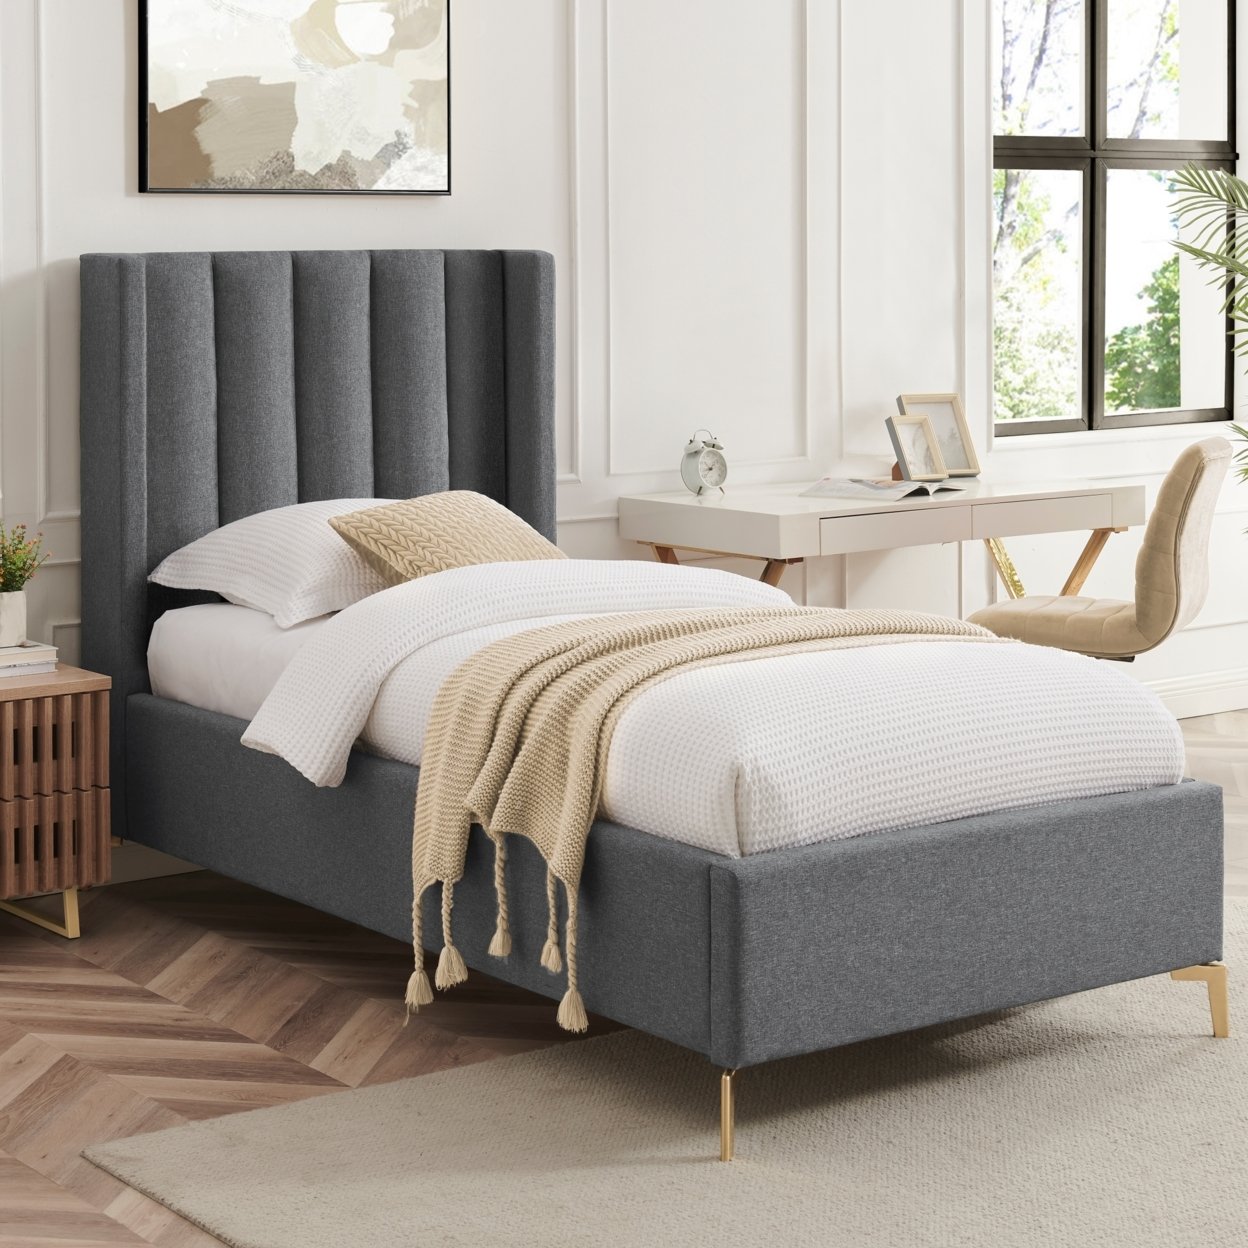 Naeem Bed - Linen Upholstered, Wingback Channel Tufted Headboard, Oblique Legs, Slats Included - Grey, Twin Xl